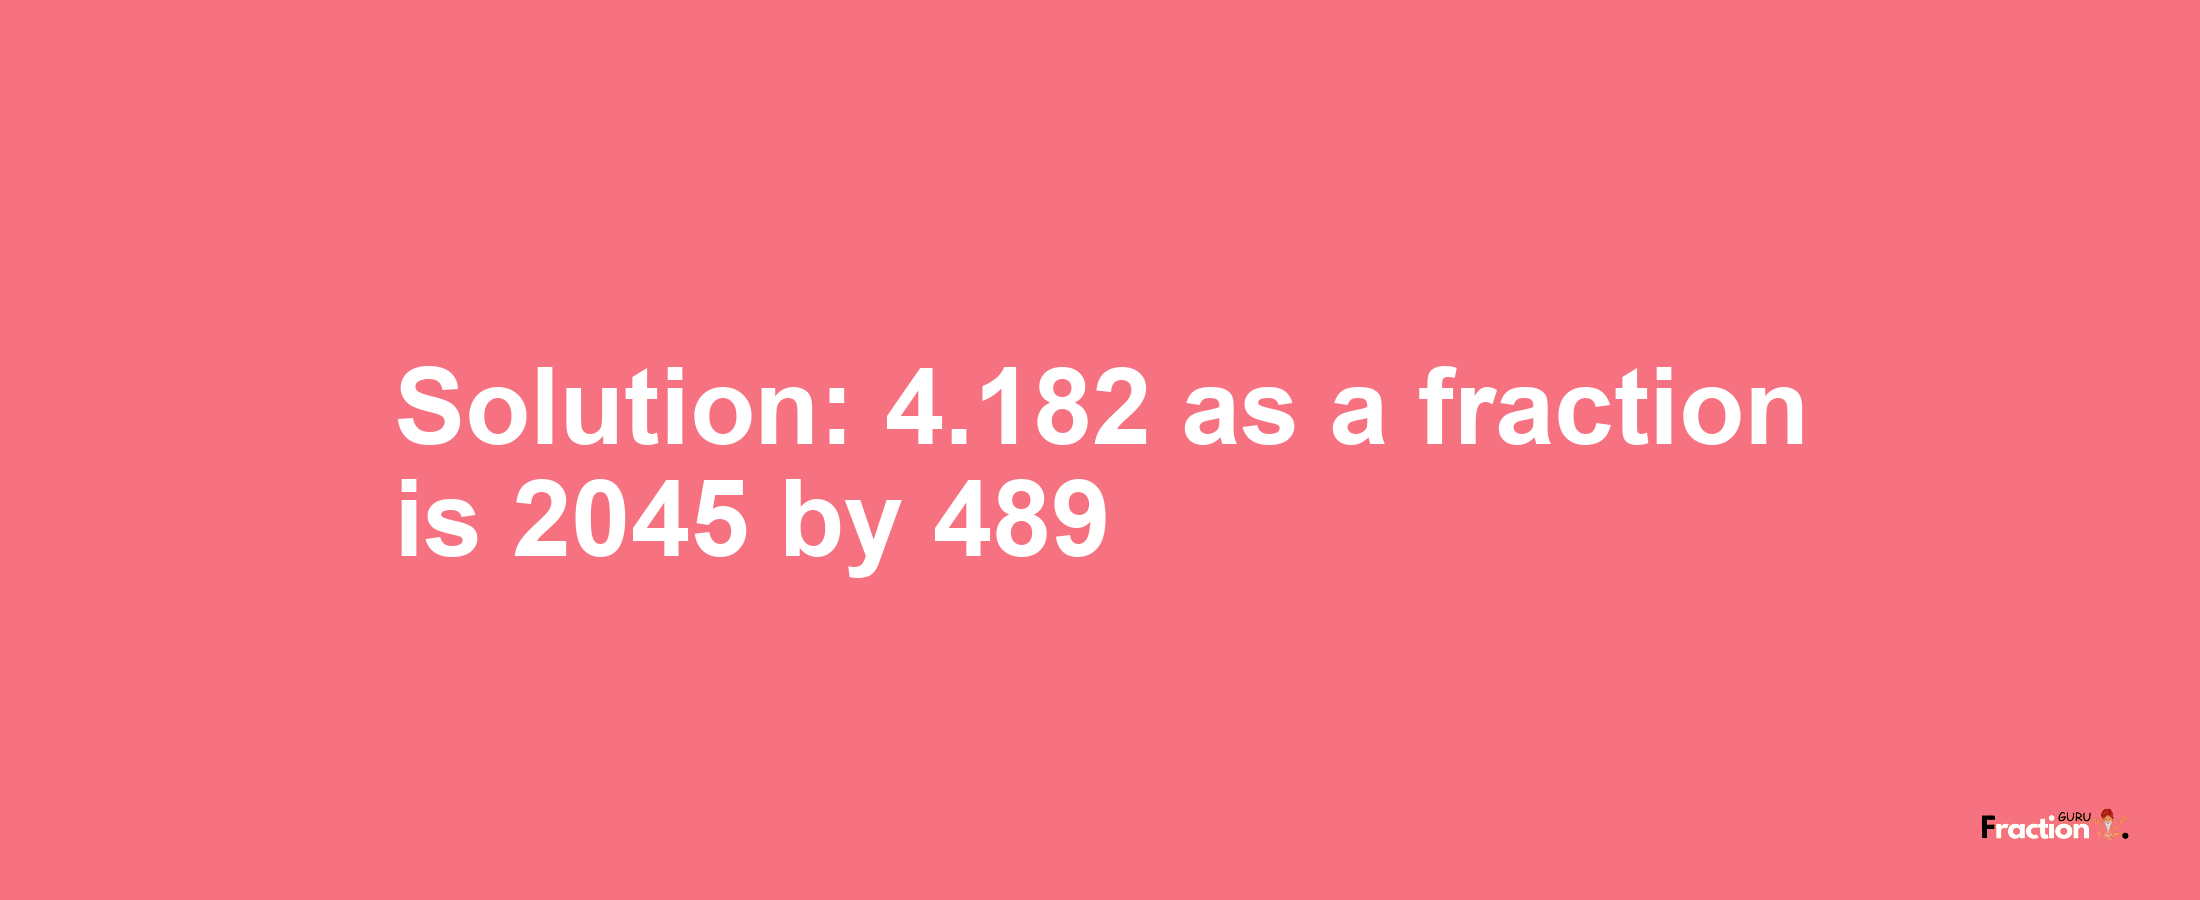 Solution:4.182 as a fraction is 2045/489